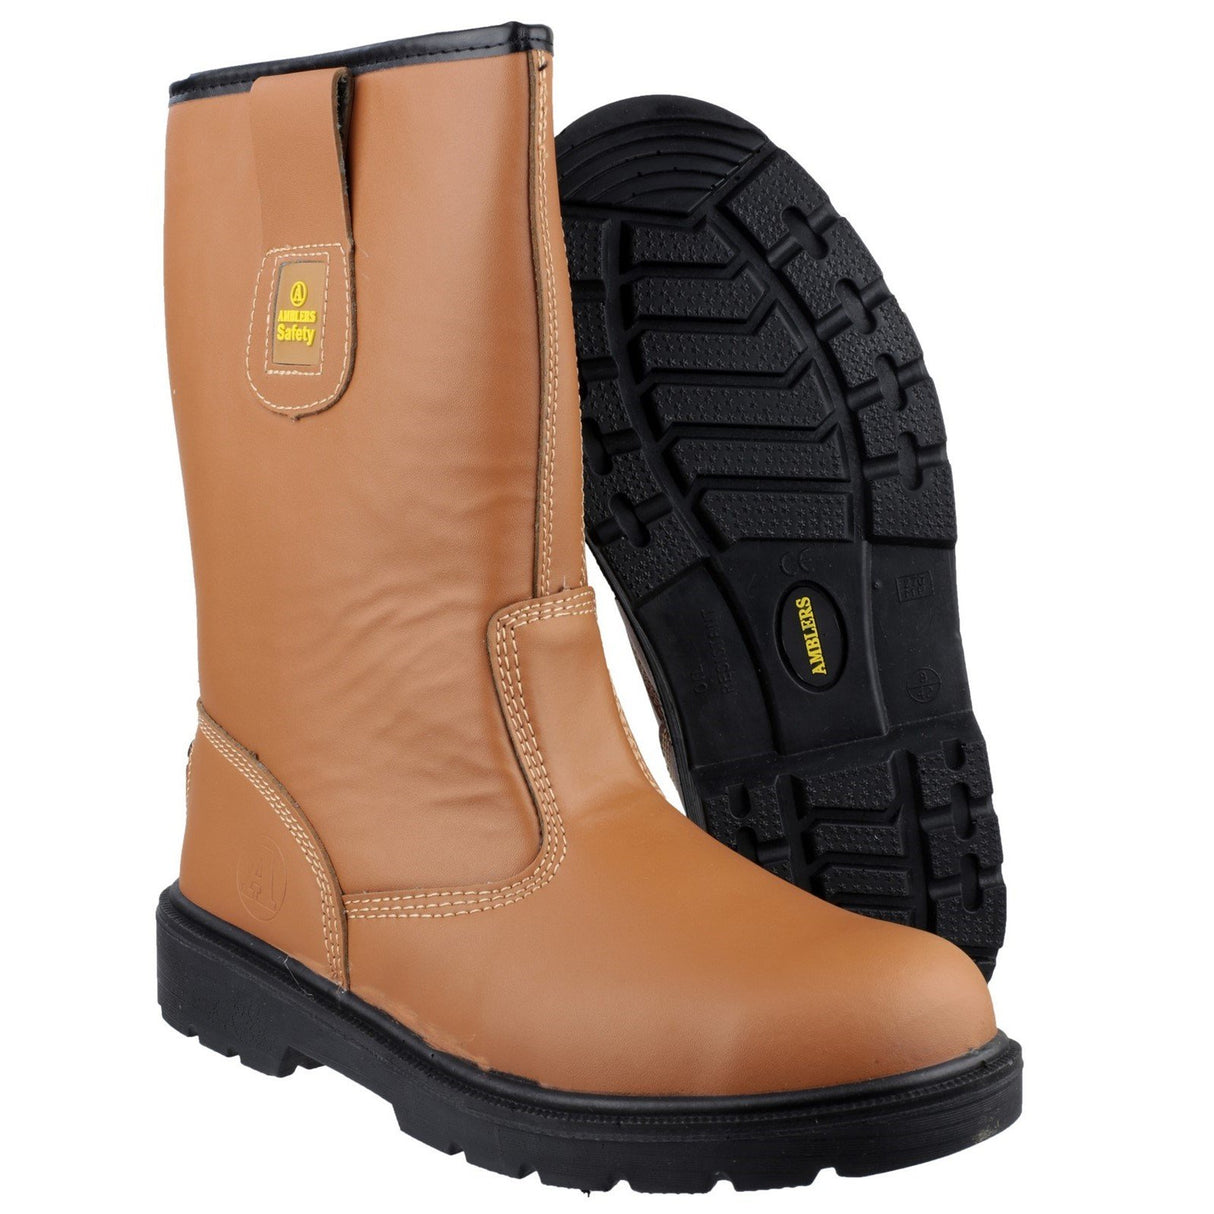 Amblers Safety Classic Rigger Safety Boots